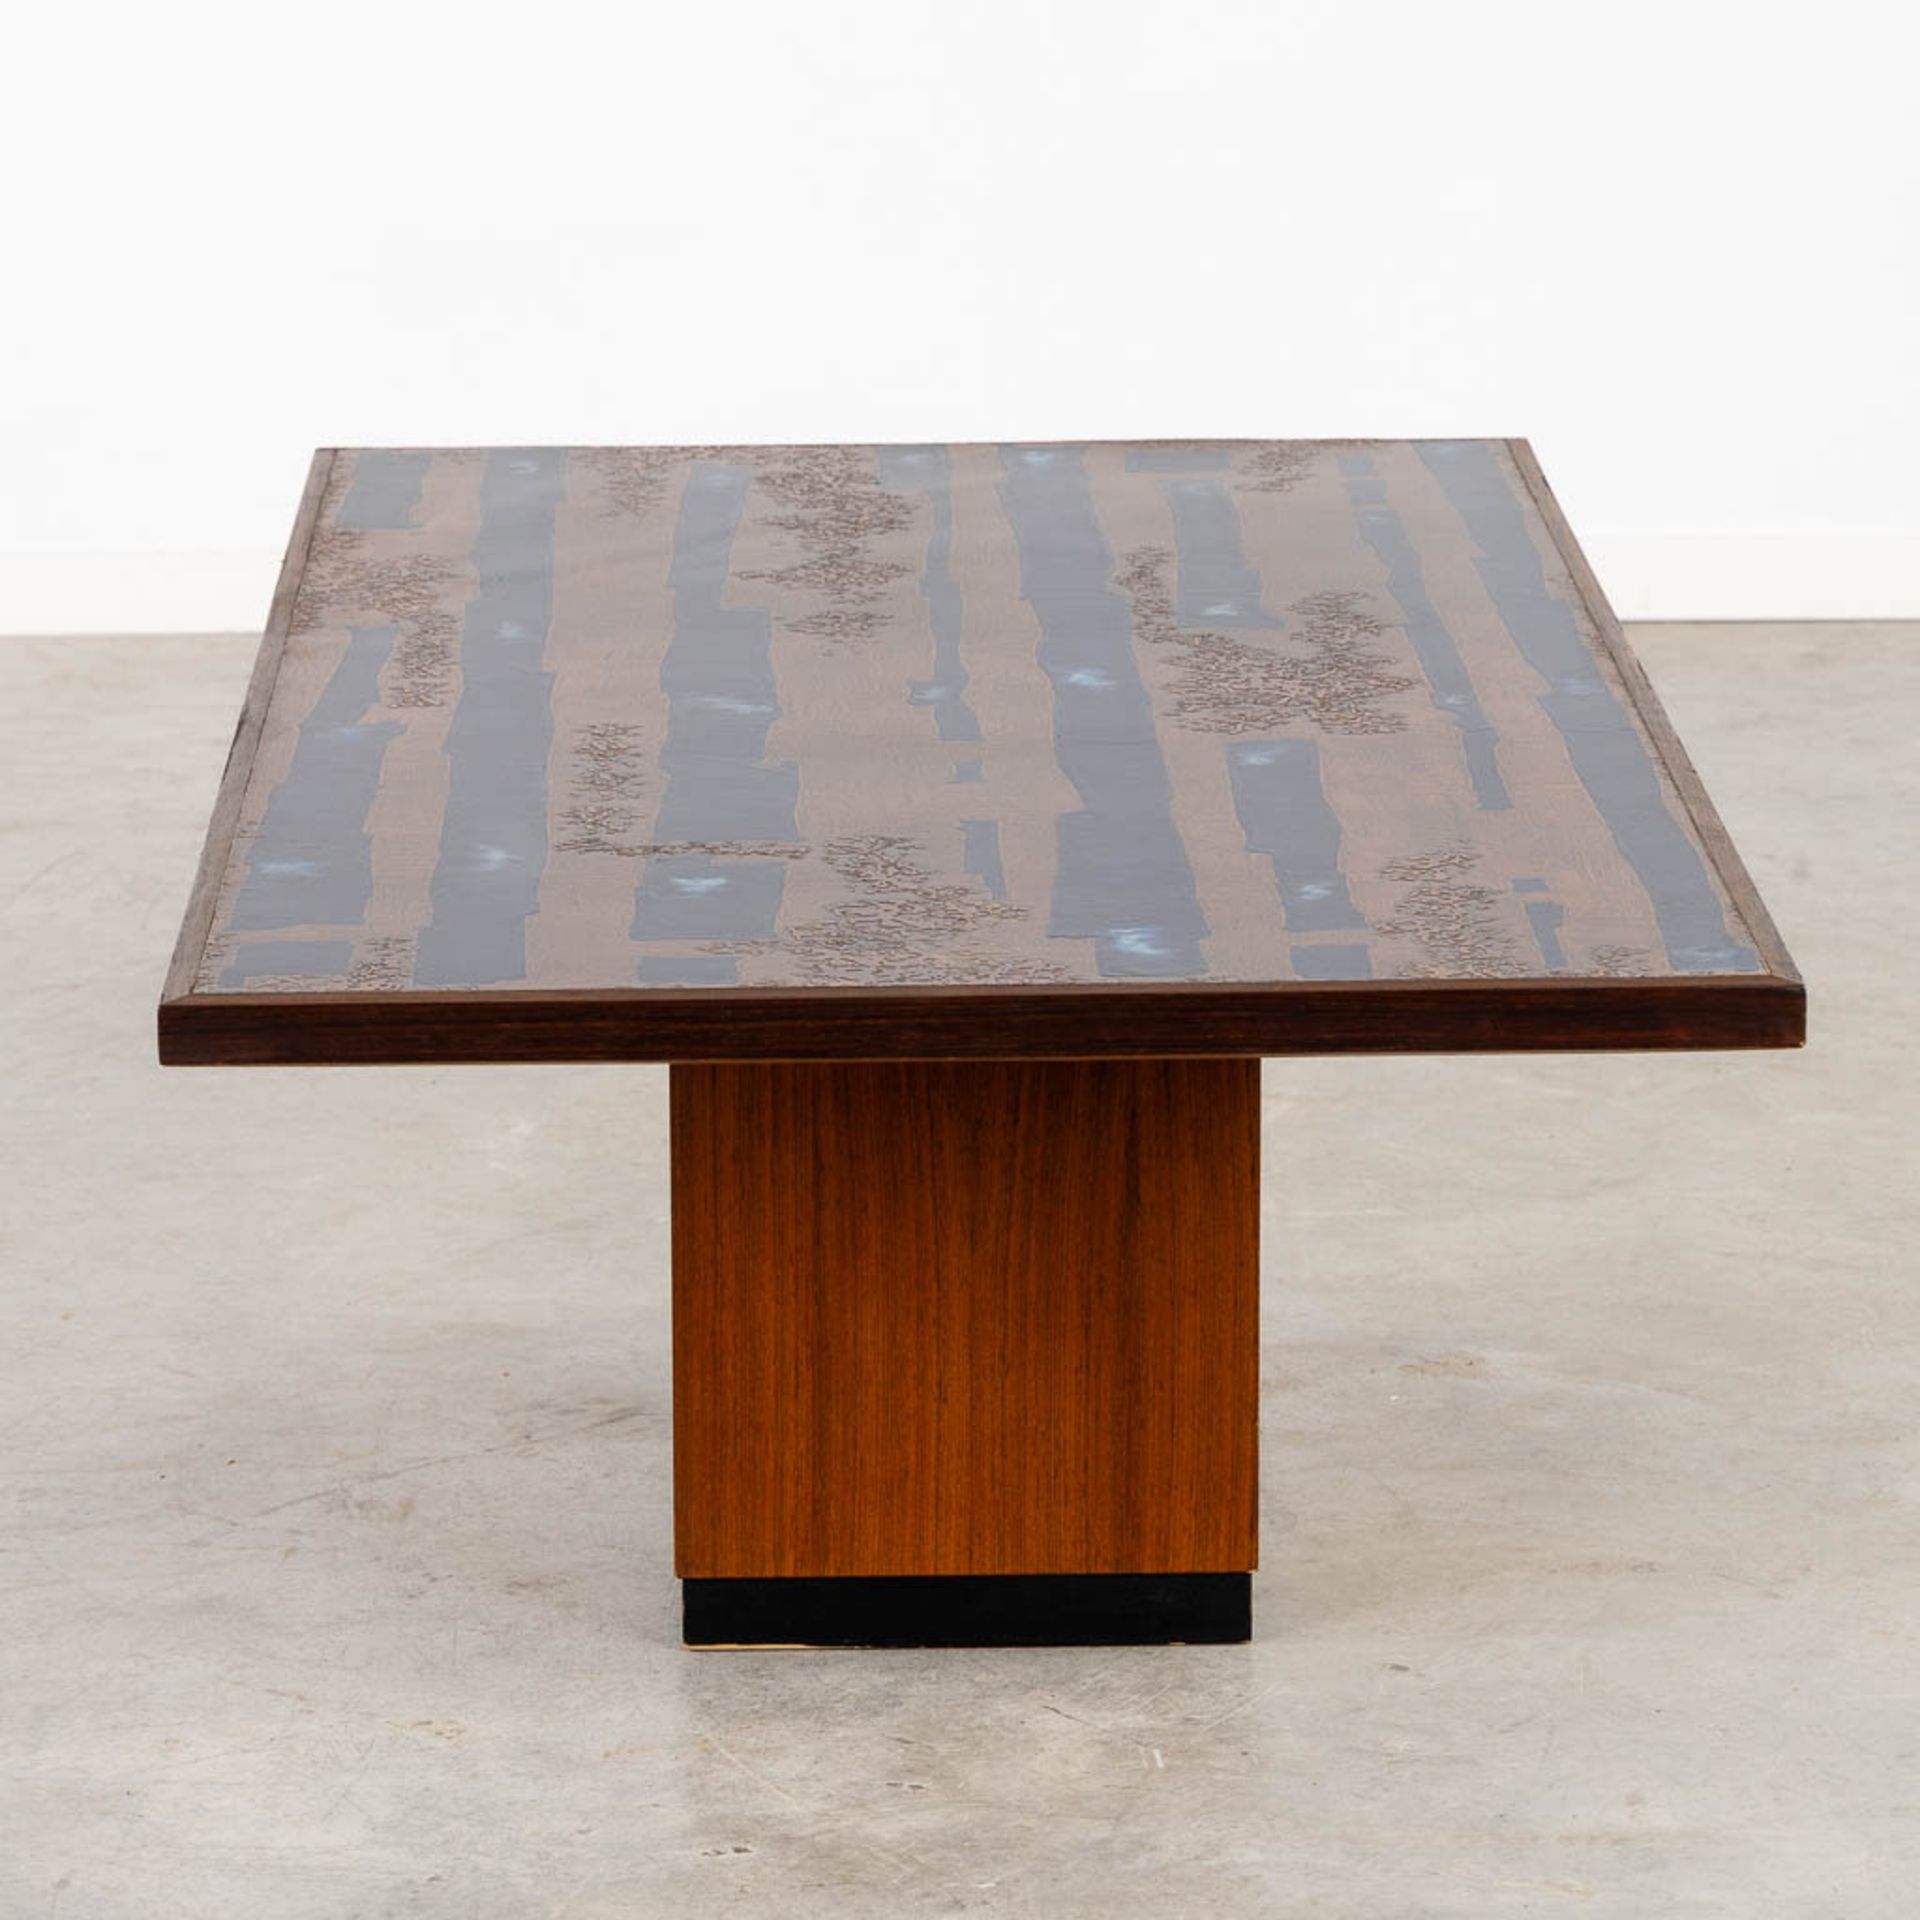 Heinz LILIENTHAL (1927-2006) 'Coffee Table' . (L:75 x W:150 x H:45 cm) - Image 6 of 10